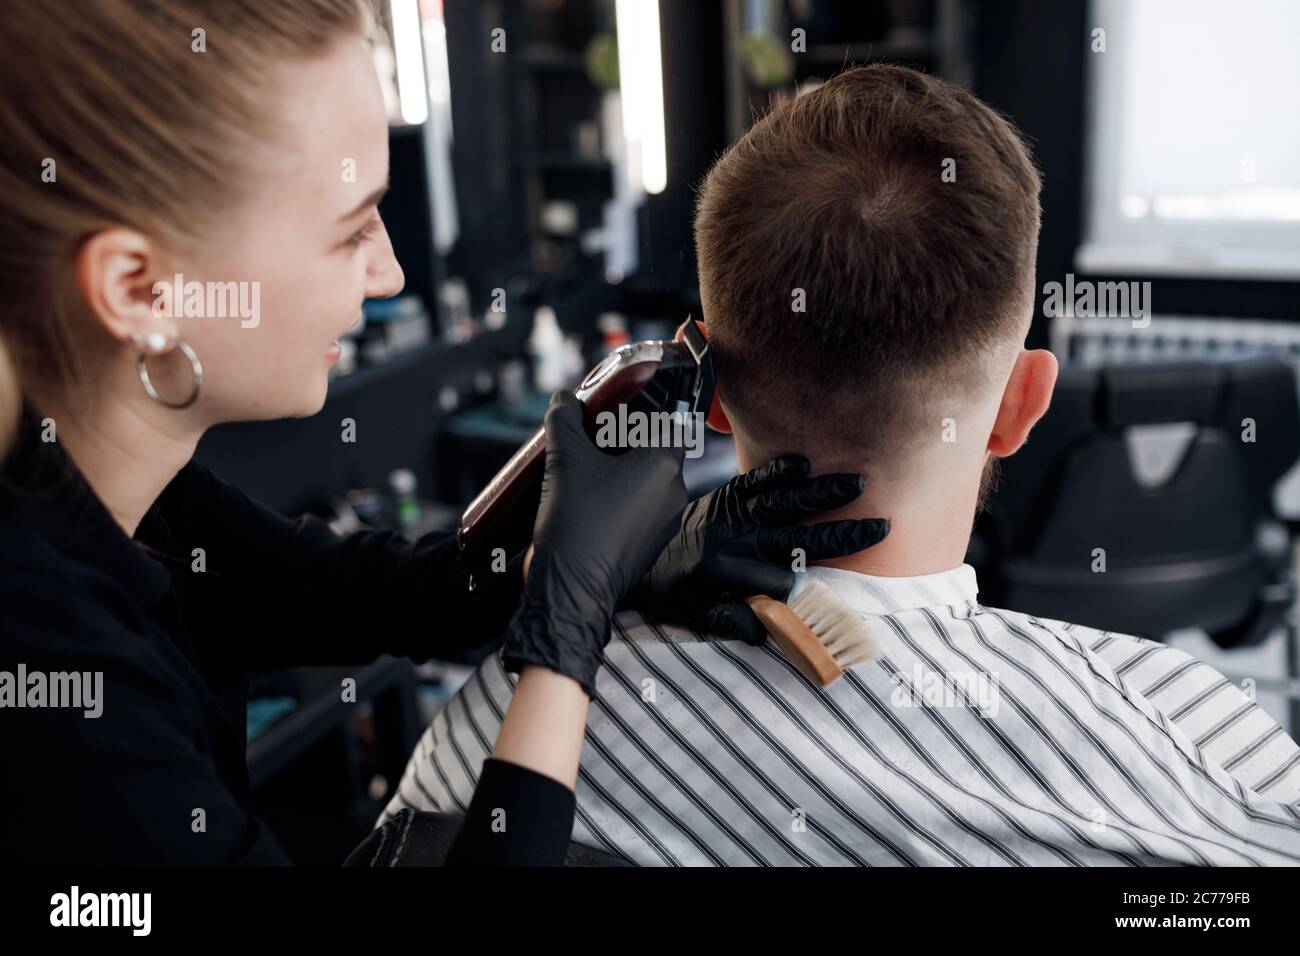 Backside of a man in Barbershop, cutting by barber girl Stock Photo